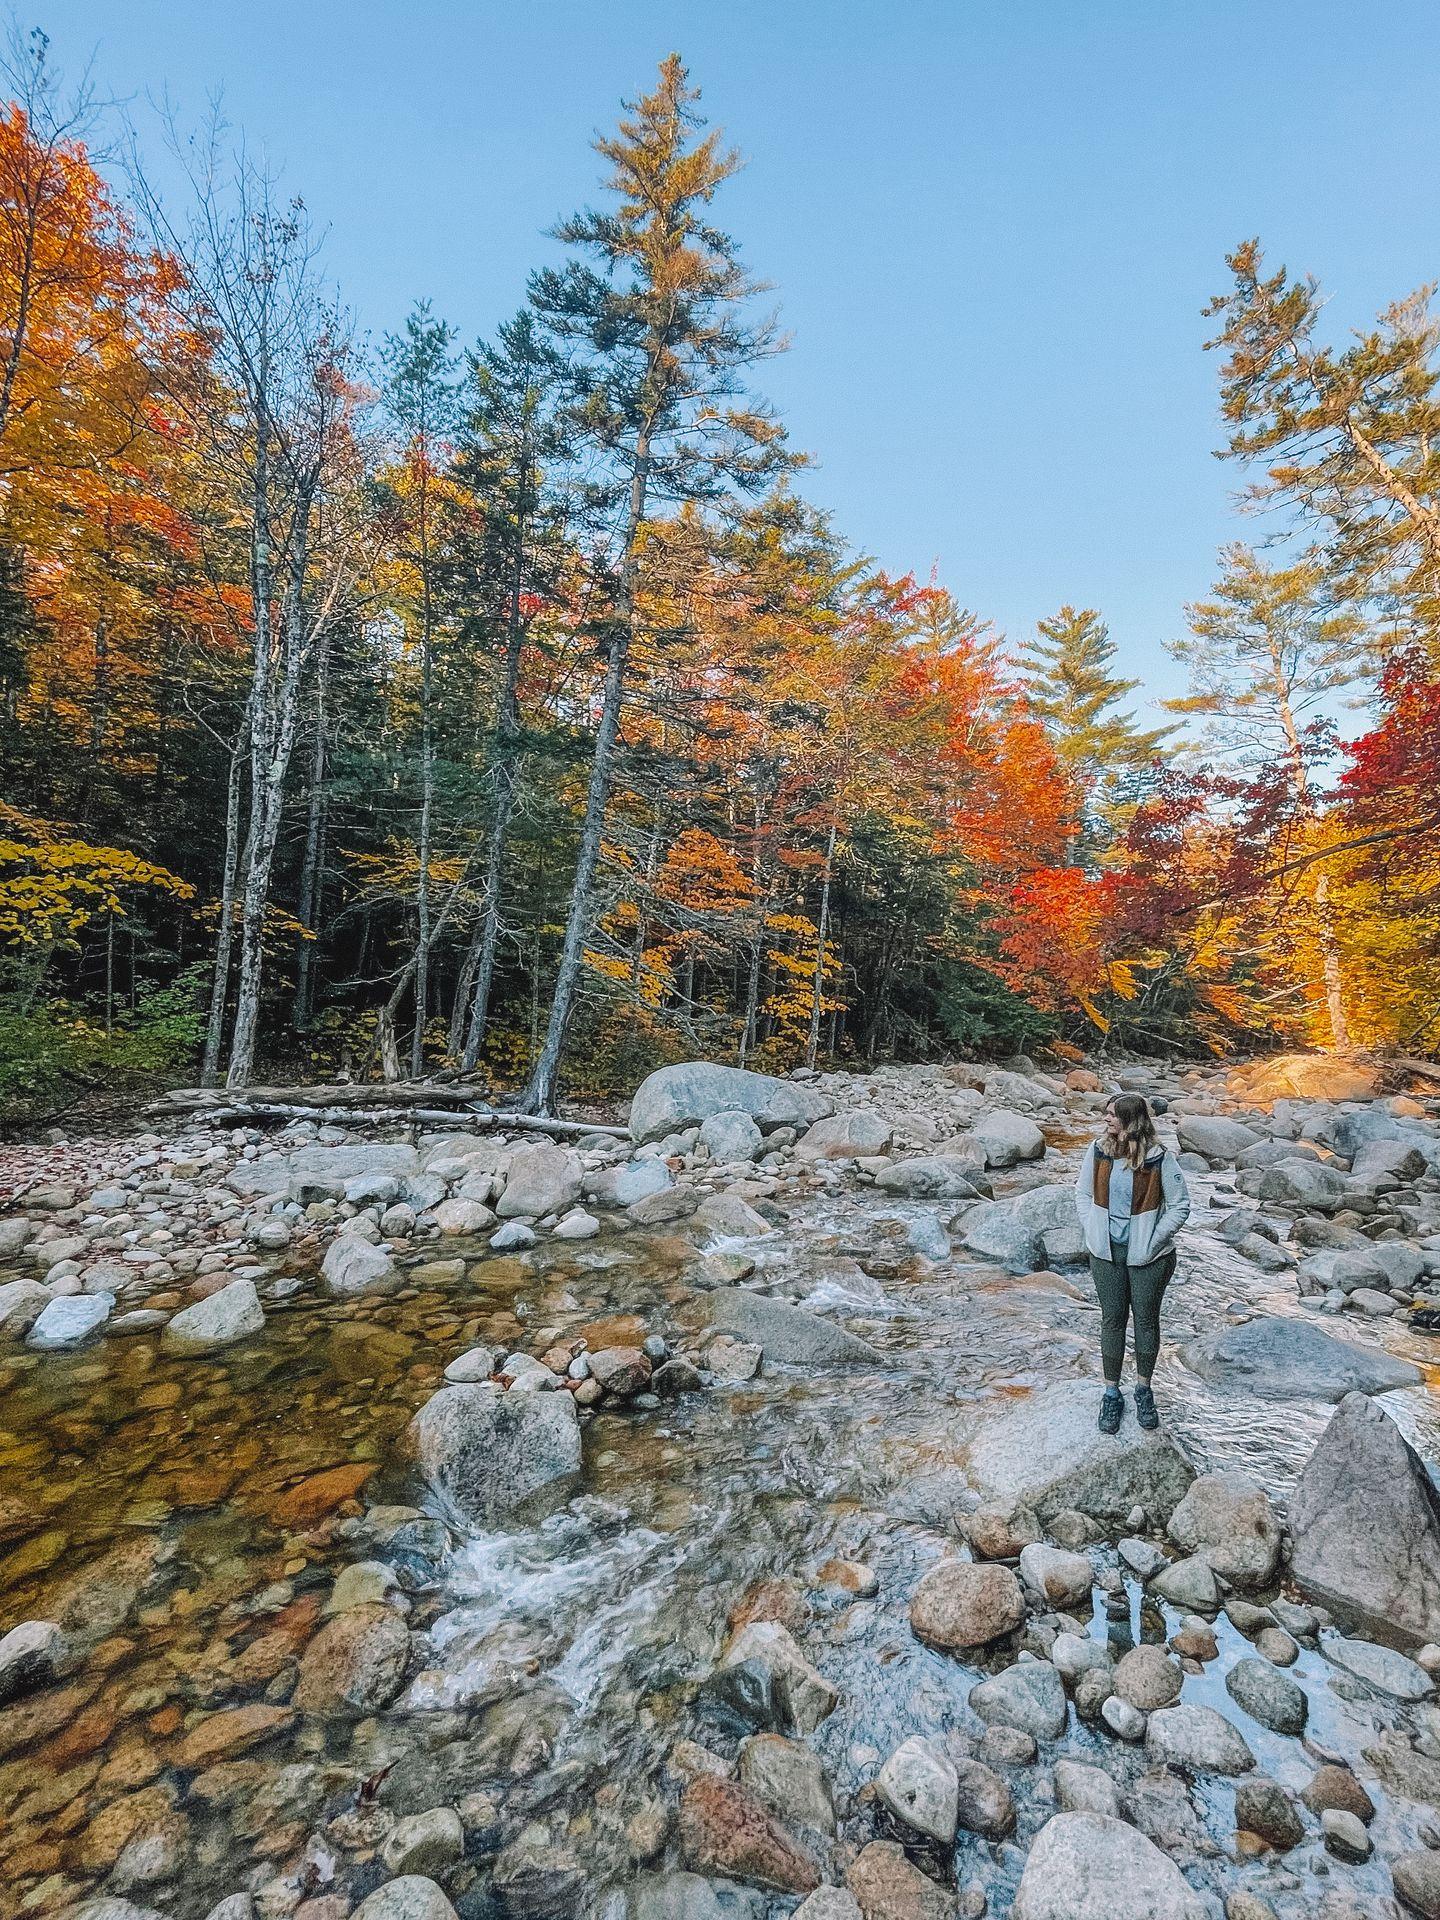 Lydia standing on rocks next a creek. Nearby there are trees with brightly colored foliage.